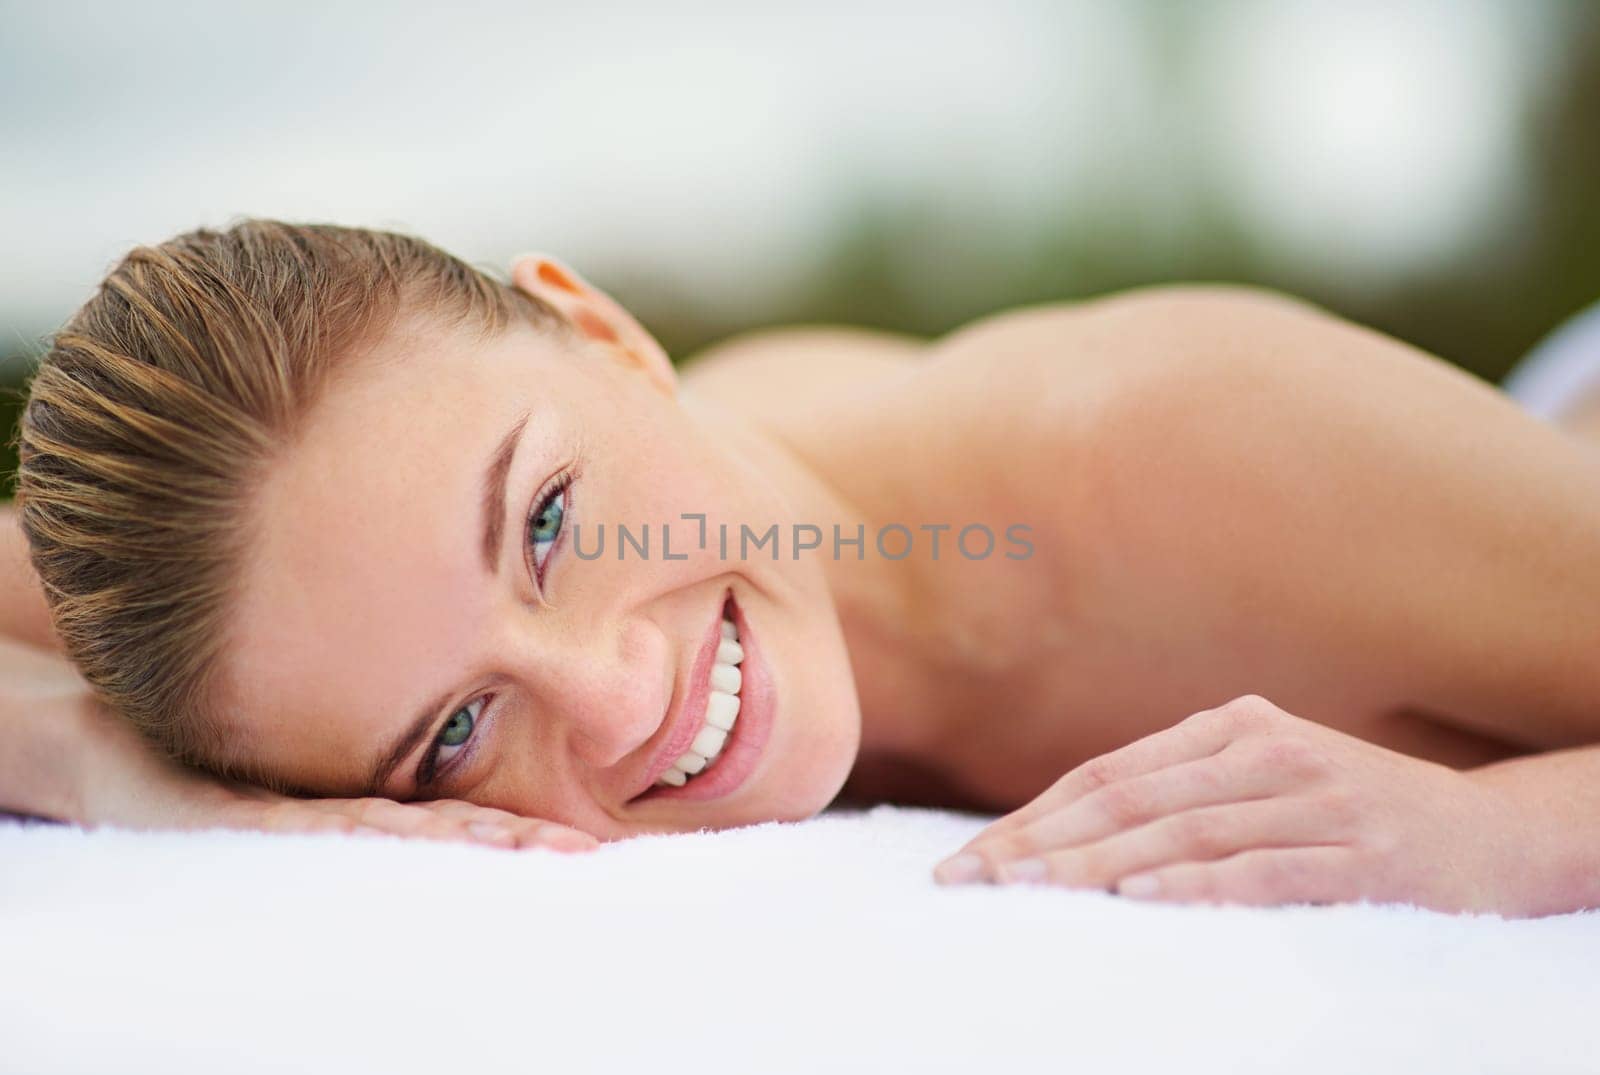 Smile, spa and portrait of woman on massage bed for wellness, beauty treatment or body care. Happy, relax and female person at luxury resort for stress relief, comfort or pamper on tropical holiday.